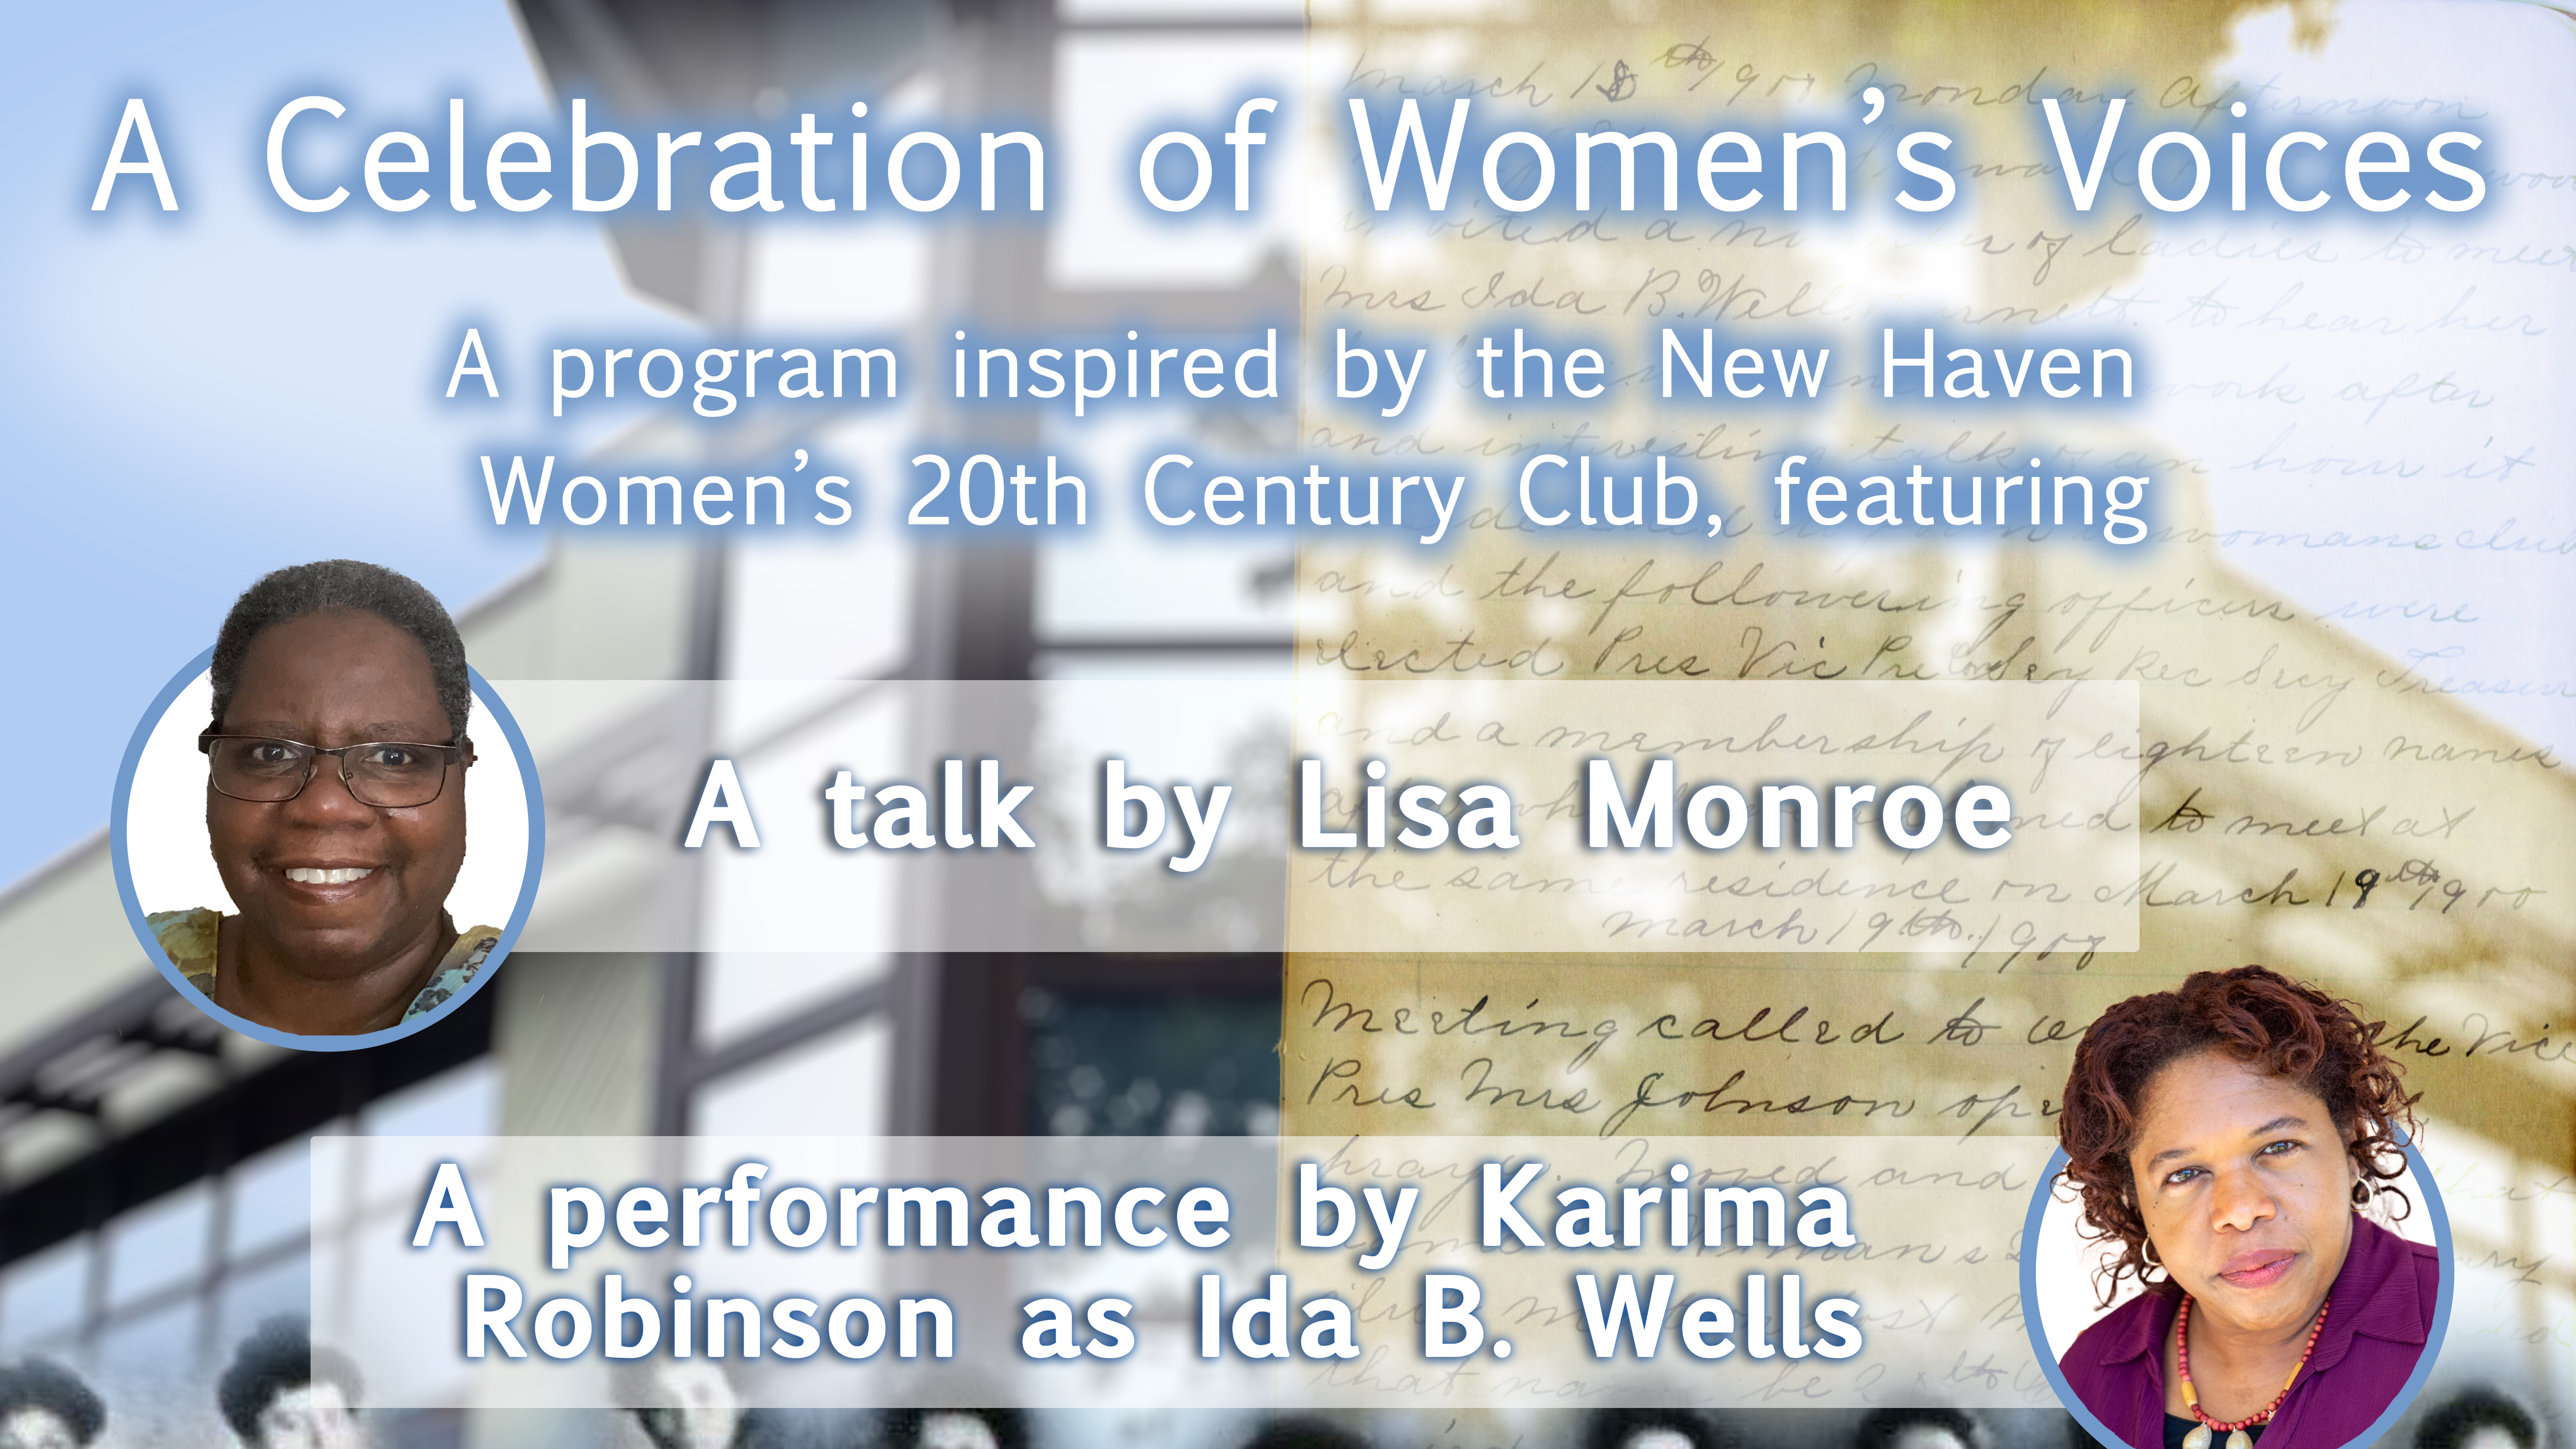 Detail of poster with title of event, with portraits of two women: speaker Lisa Monroe and performer Karina Robinson